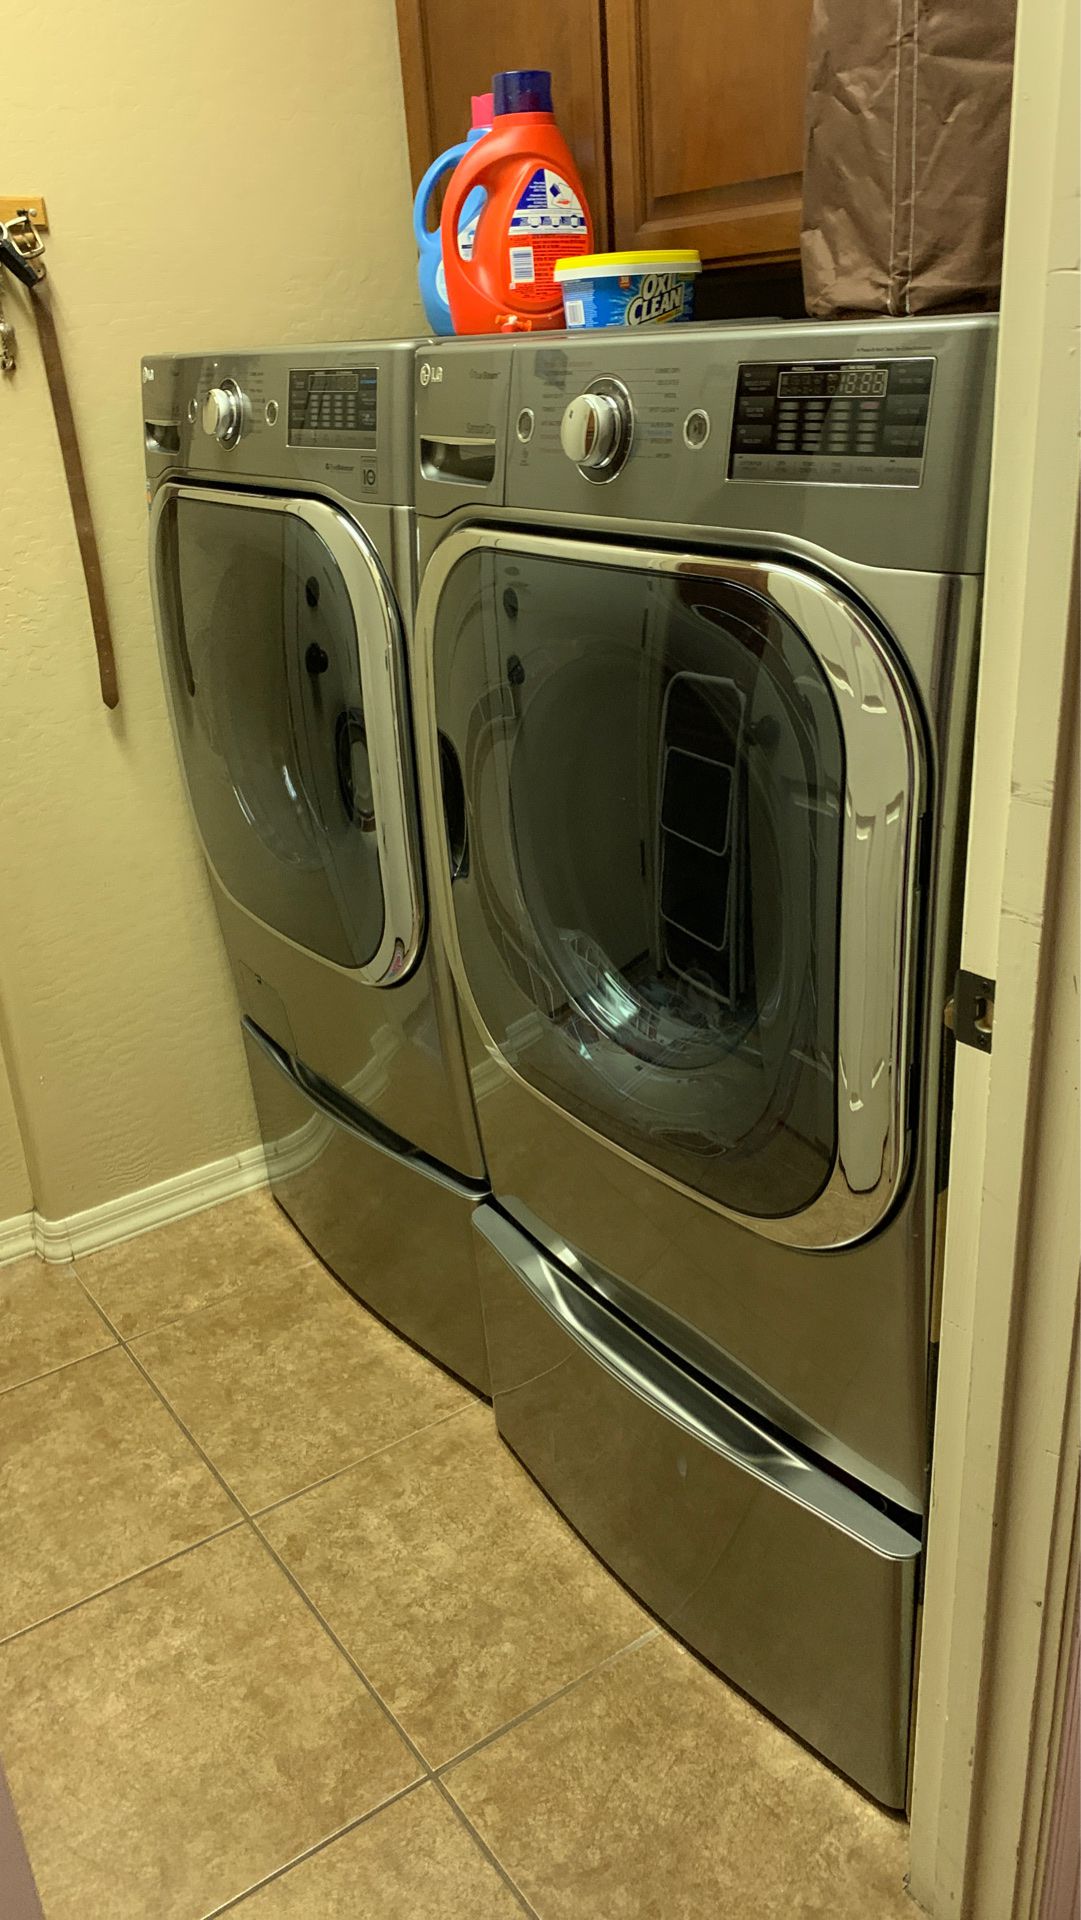 LG set washer and Dryer Ultra capacity with pedestal, both working perfectly